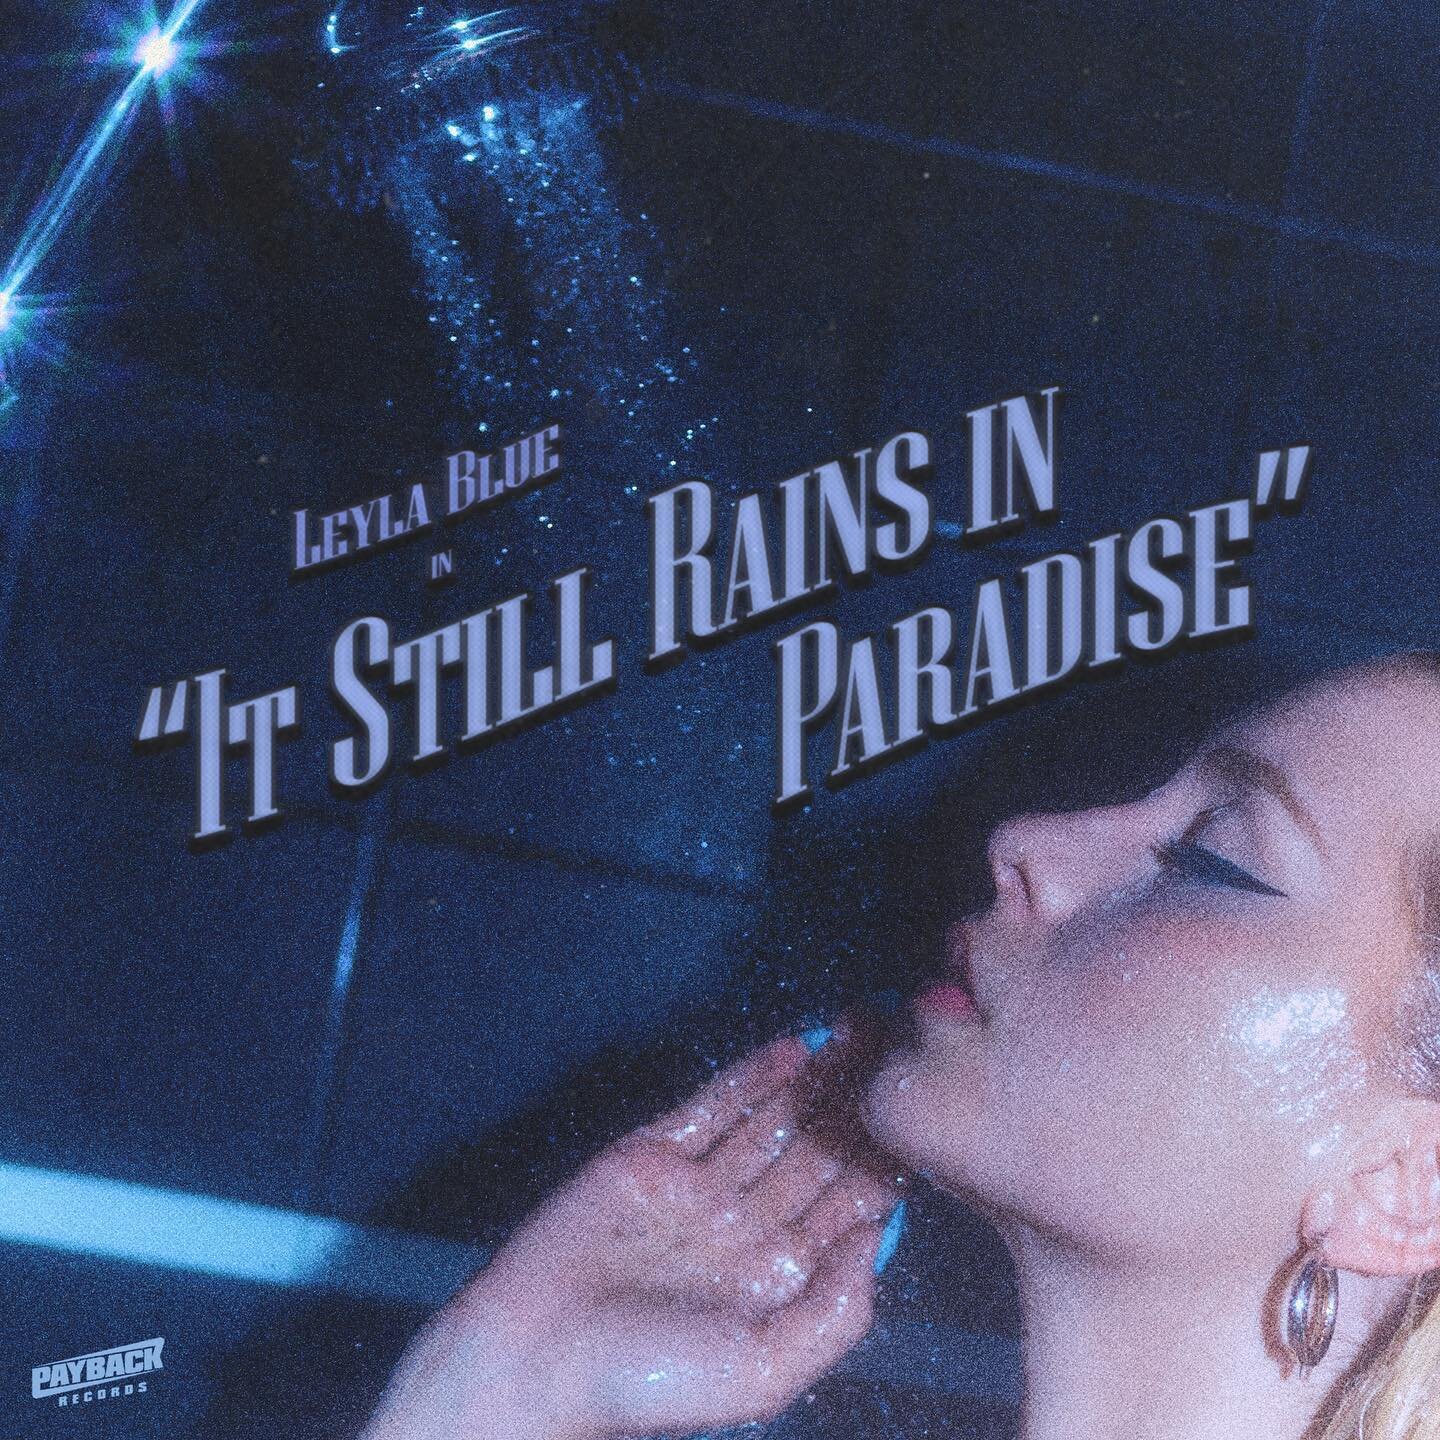 We&rsquo;re excited to announce that @leylabluetoo&rsquo;s latest single &ldquo;It Still Rains in Paradise'' is out NOW in partnership with Payback Records! 🎉🎧 

Released during mental health awareness month, this track will support nonprofits help